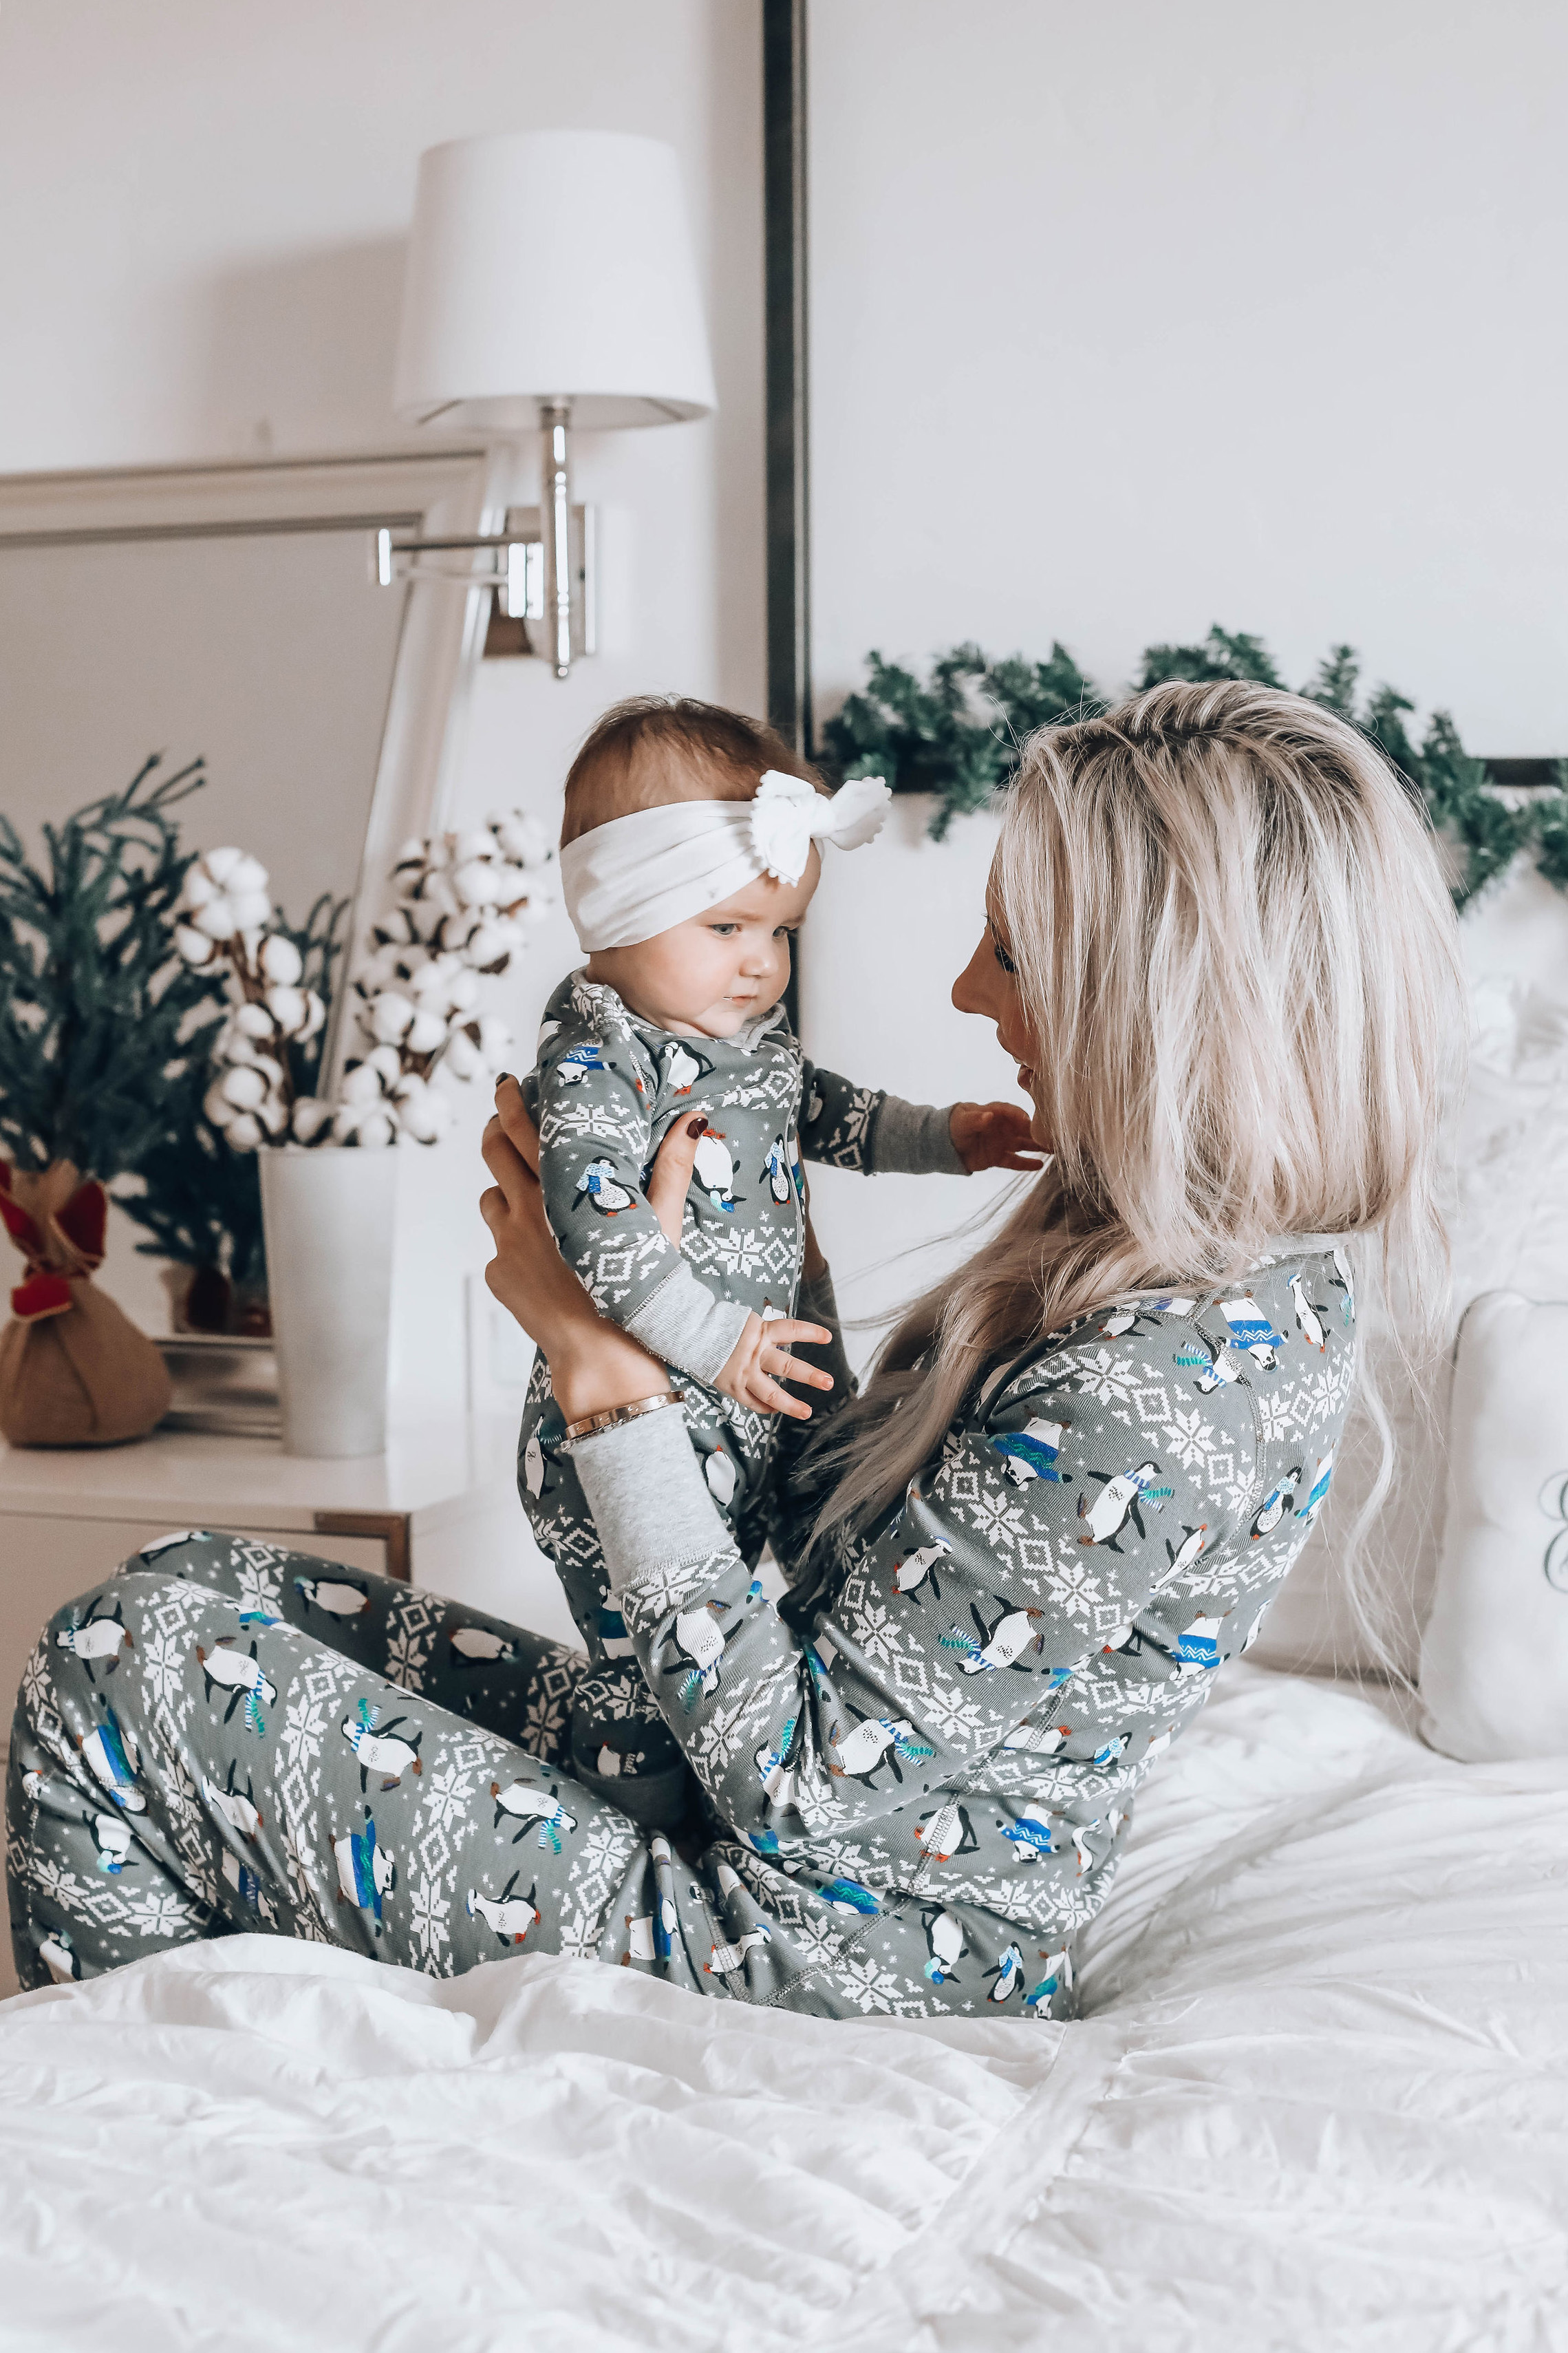 Reno Nevada Blogger, Emily Farren Wieczorek of Two Peas in a Prada, shares her favorite matching Christmas Pajamas from Hanna Andersson! 